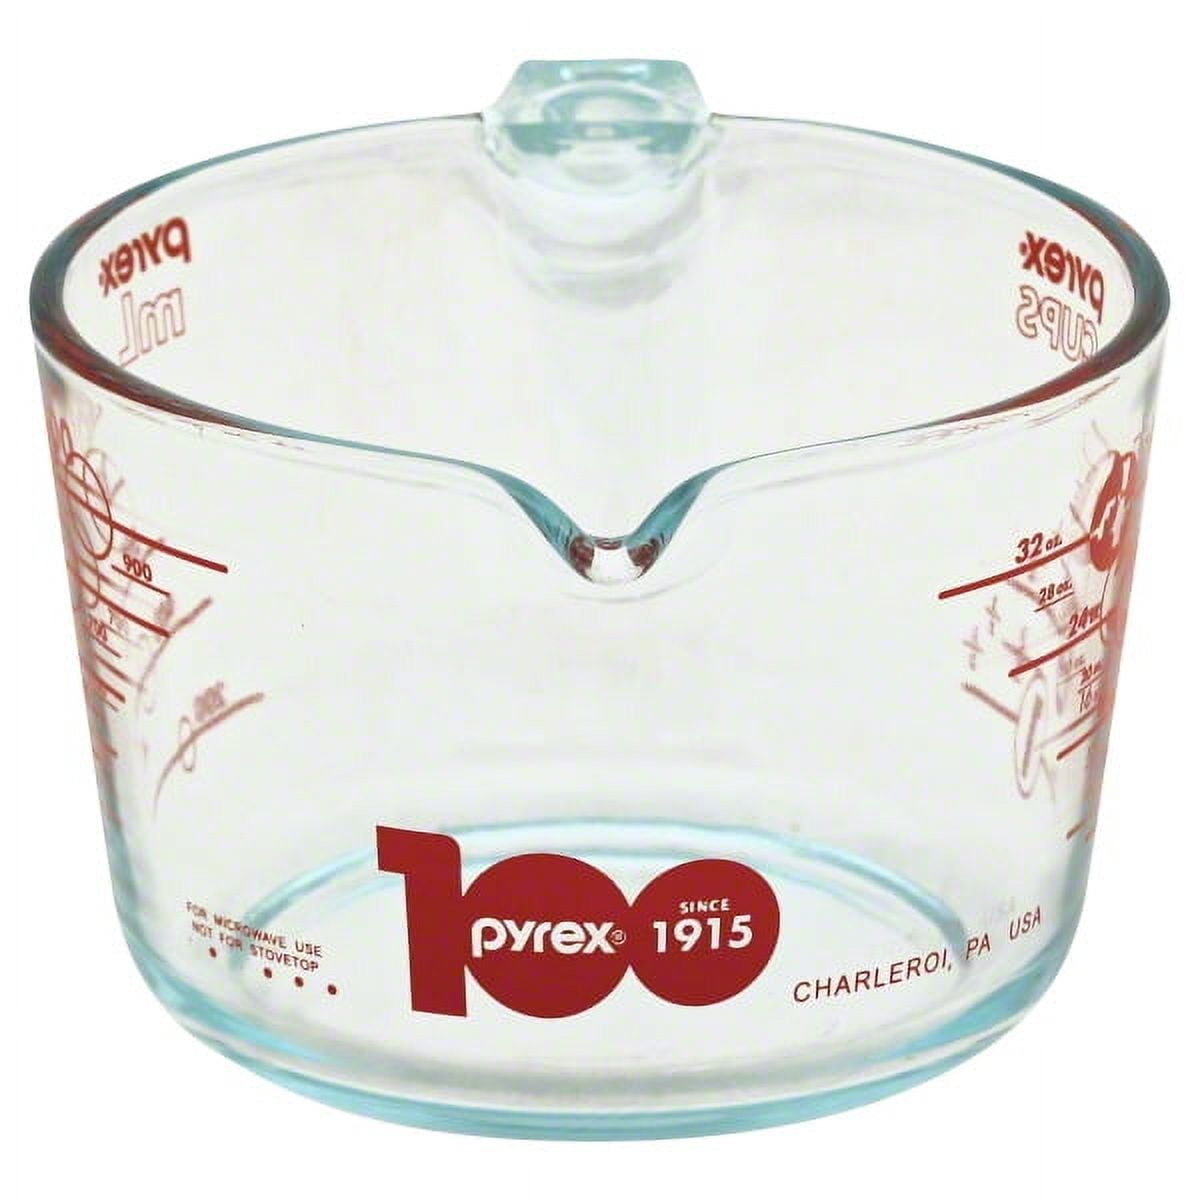 Vintage PYREX Glass Measuring Cup - 4 Cups/1QT With Red Lettering